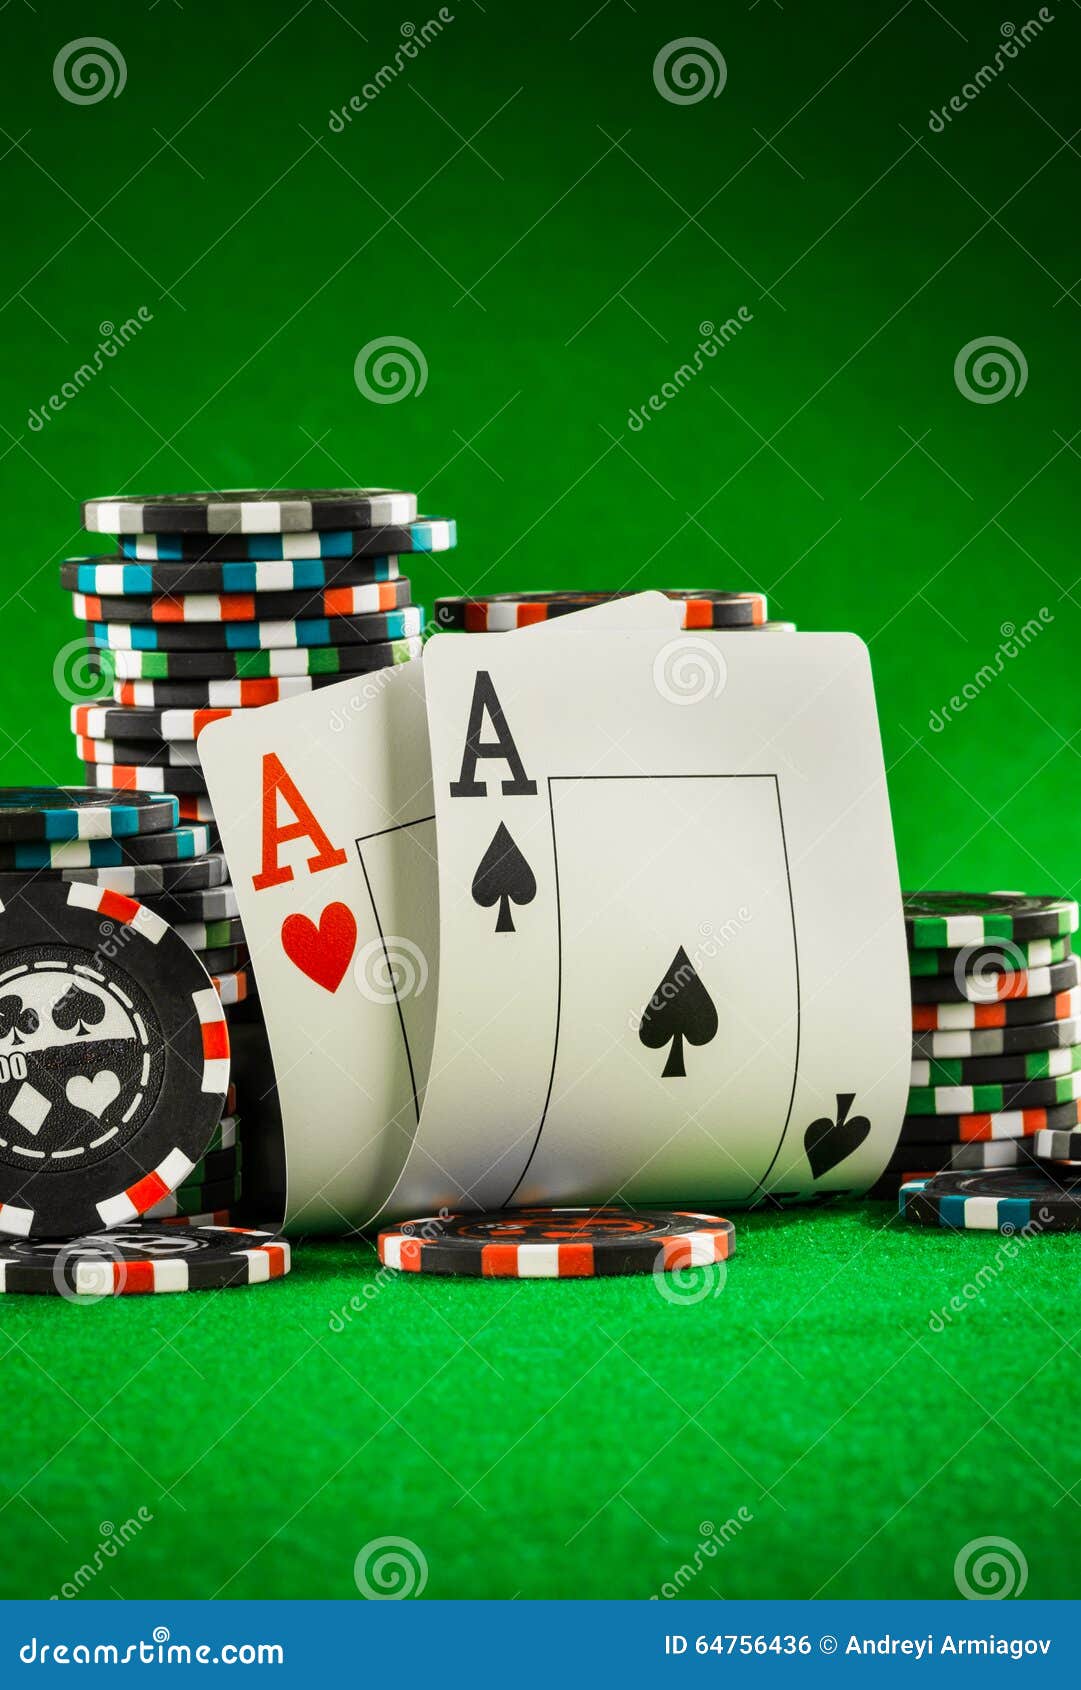 Chips and two aces stock photo. Image of hand, addiction ...